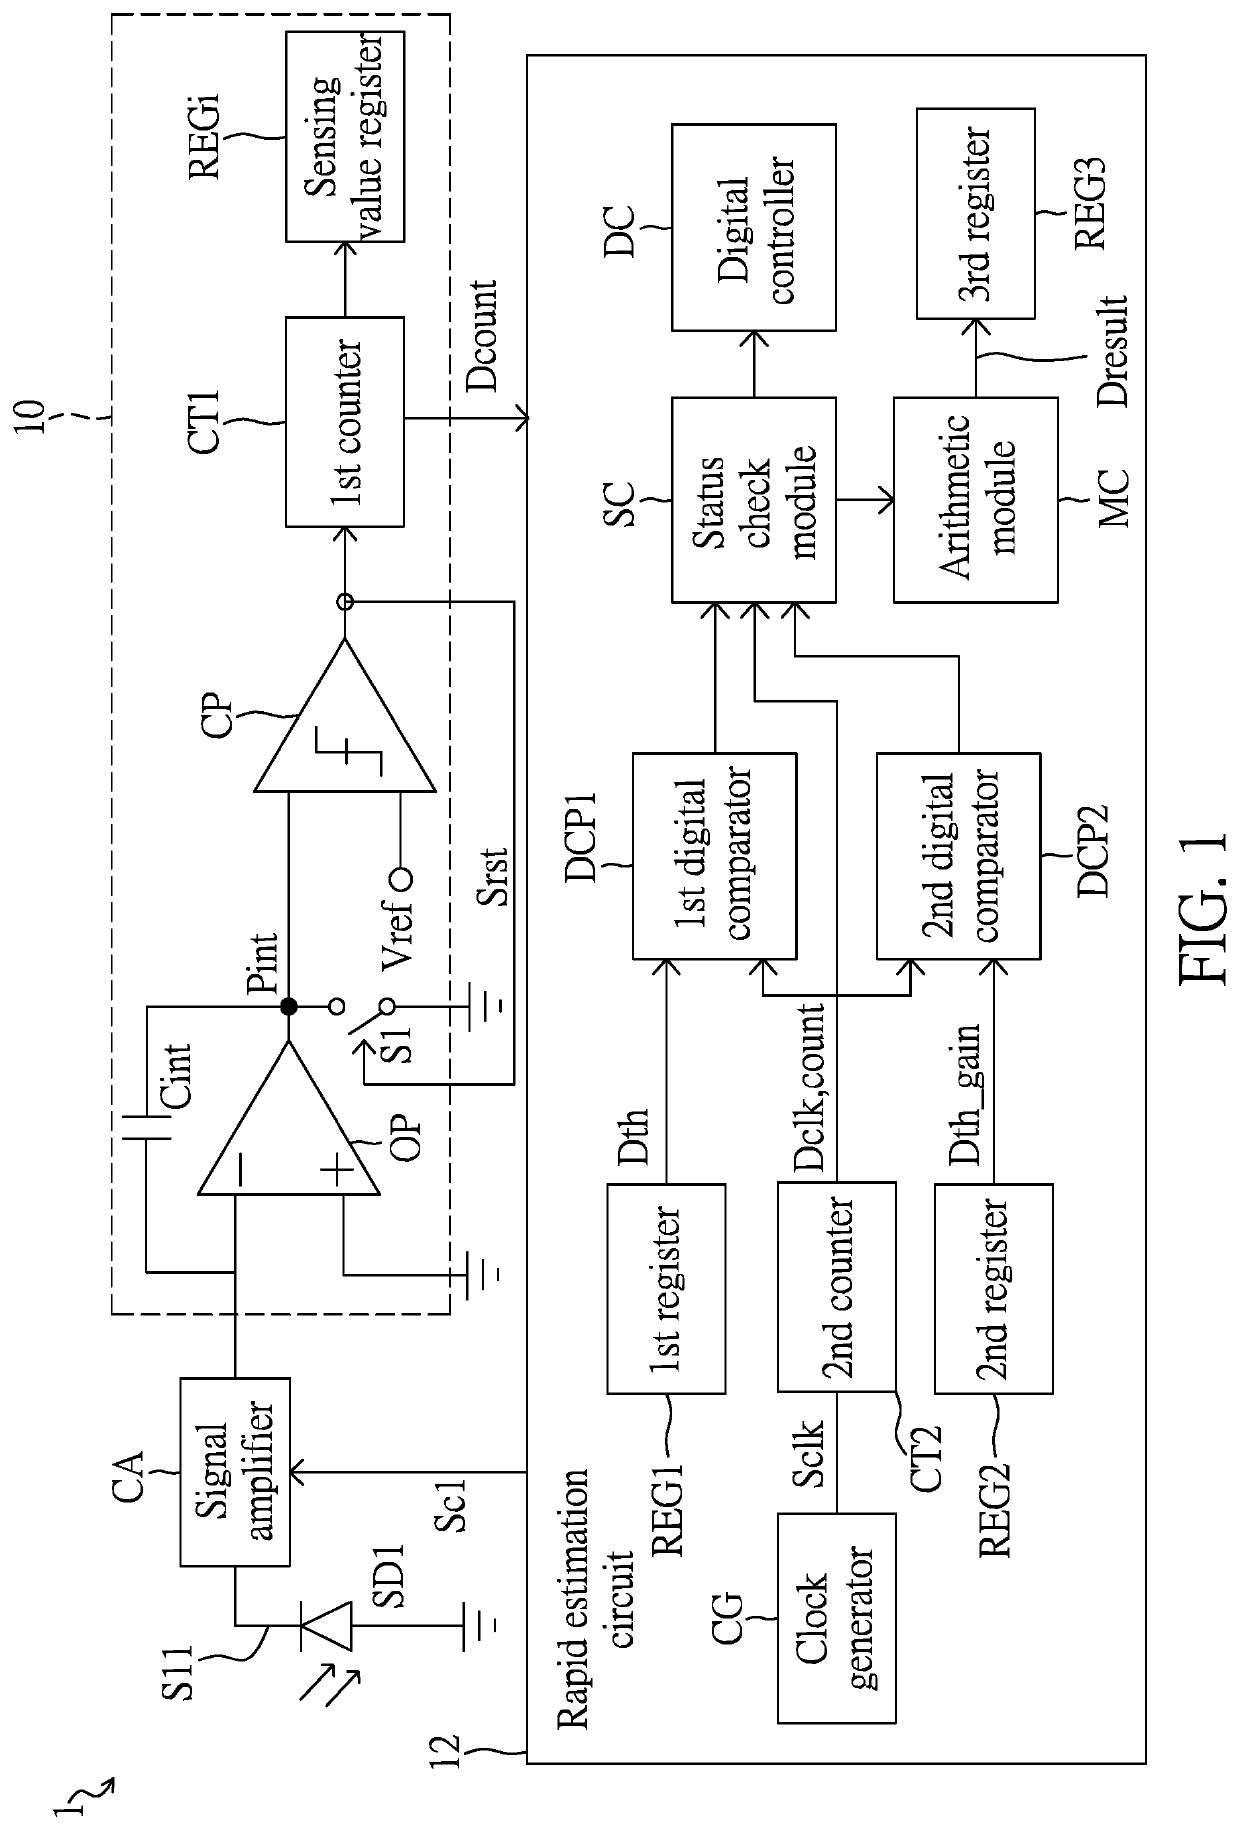 Rapid sensing value estimation circuit and method thereof